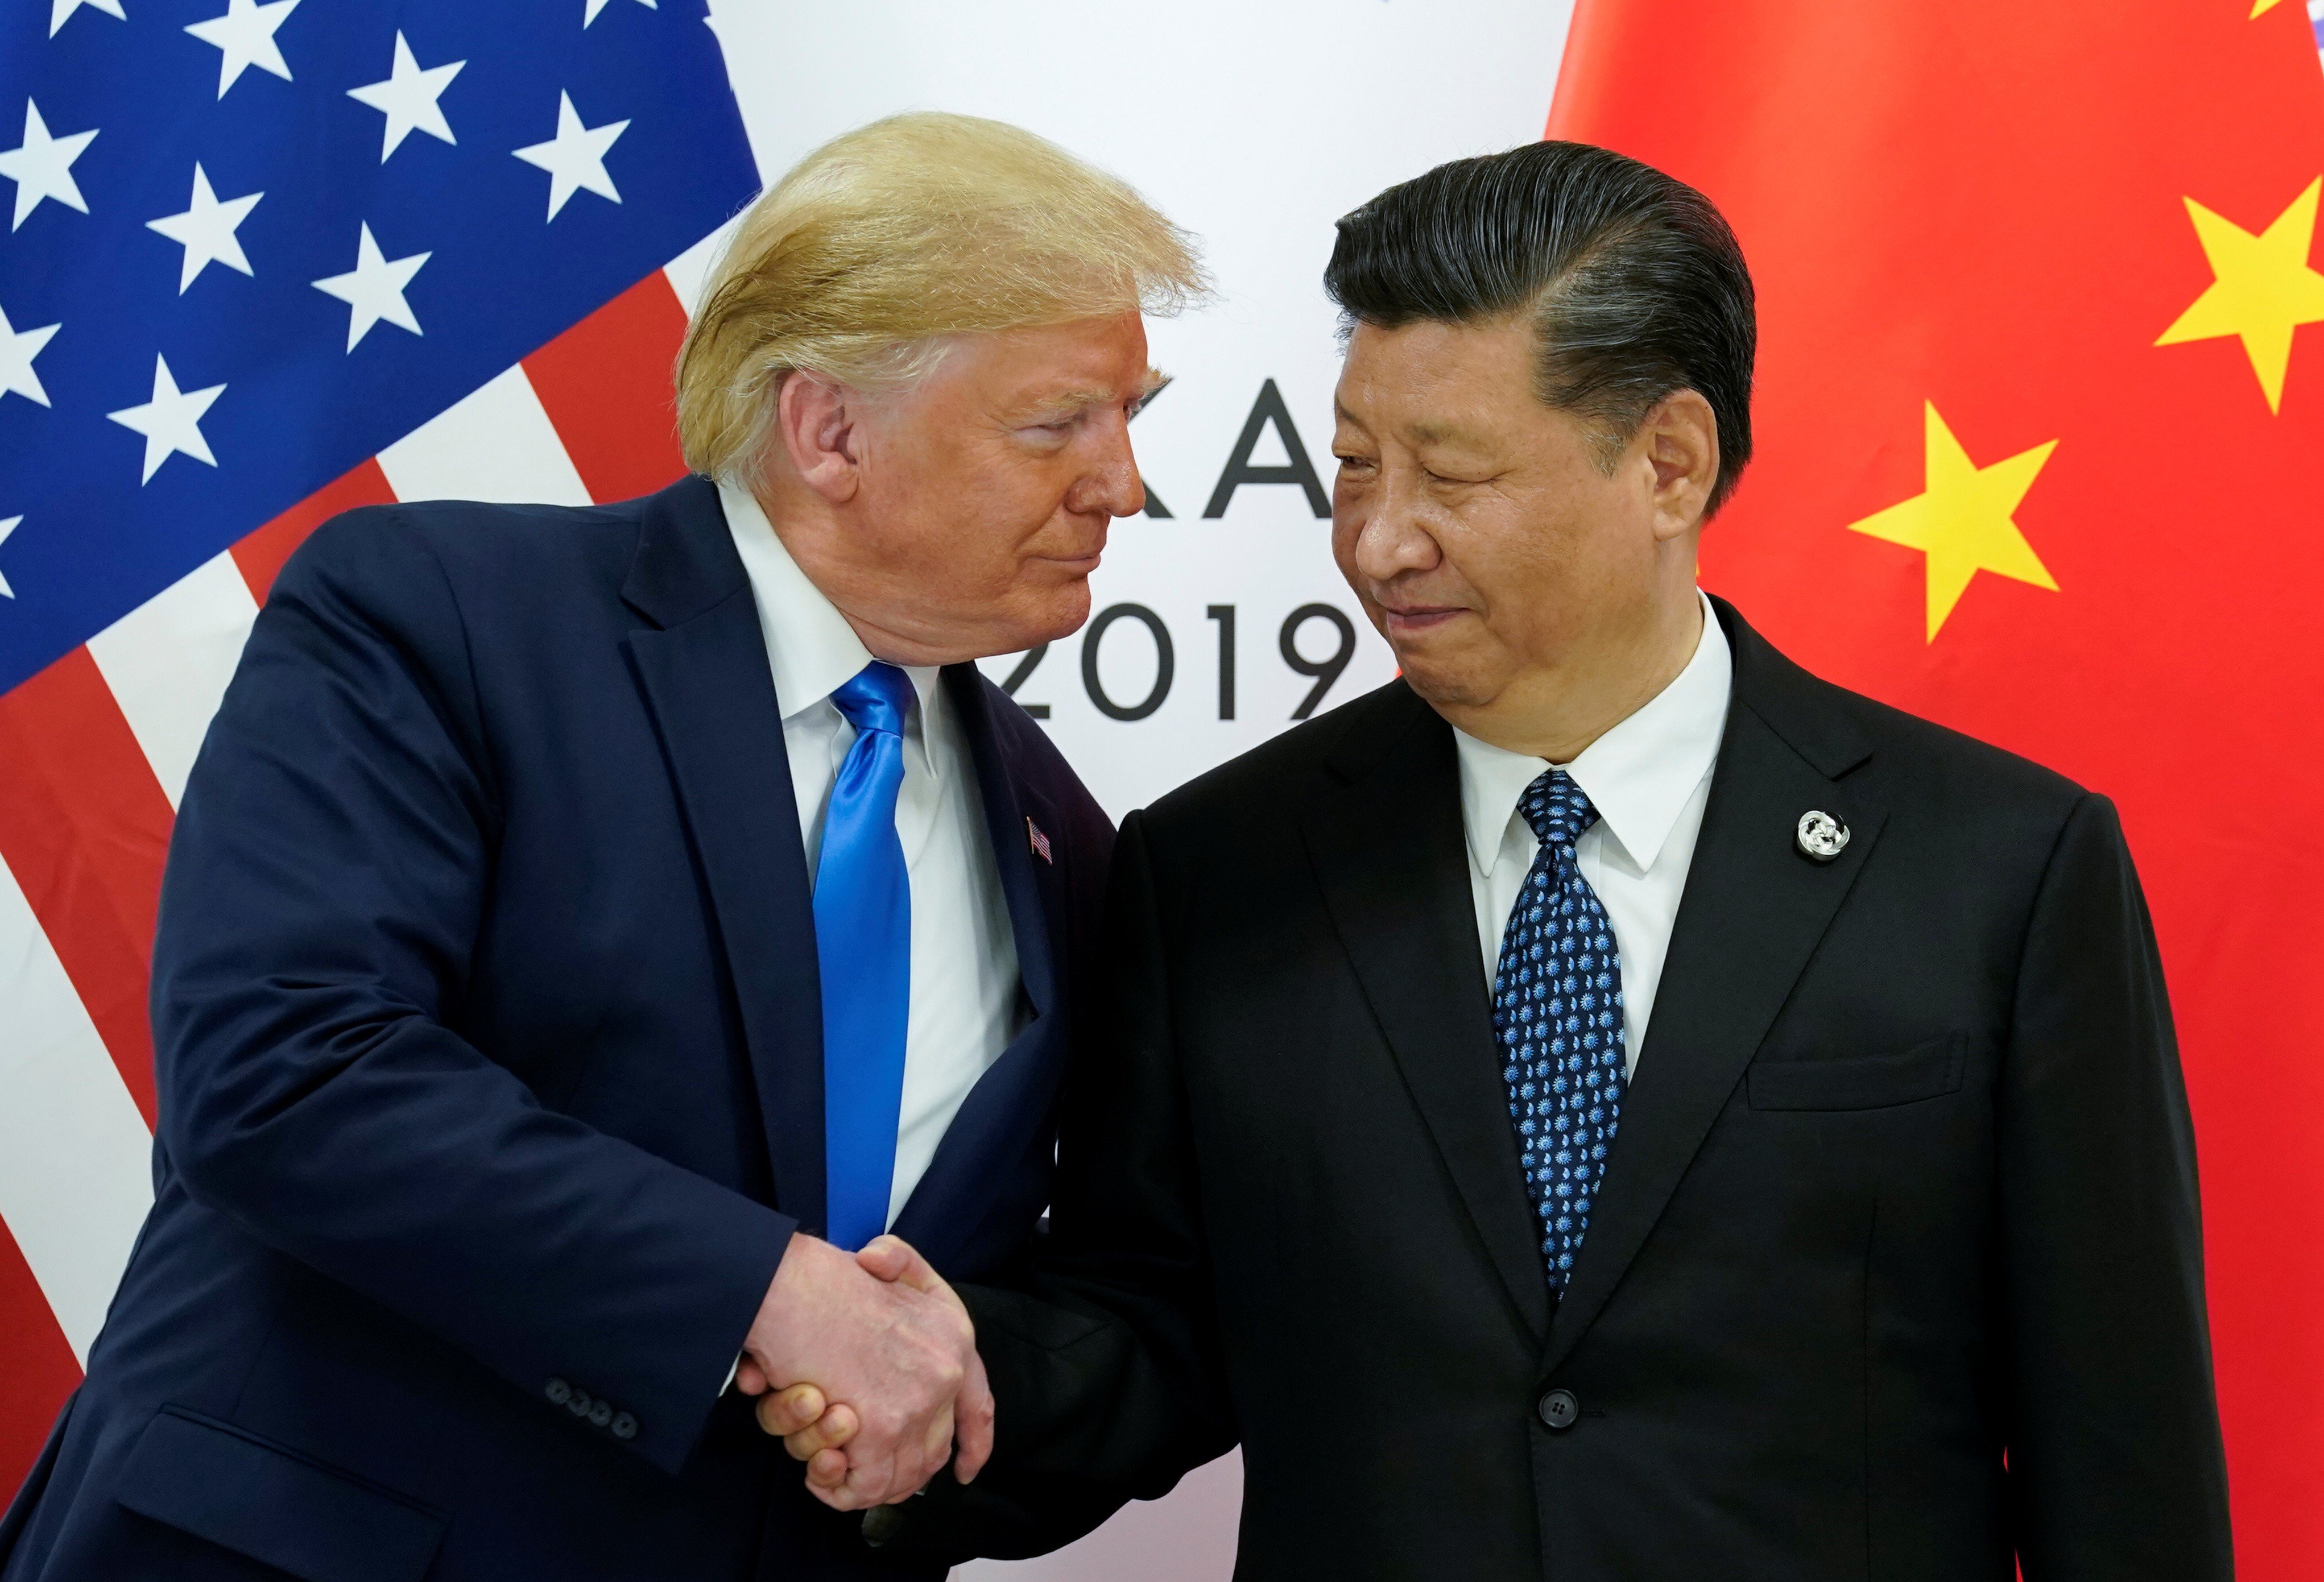 Presidents Trump and Xi used their close personal ties to get the stalled trade talks back on track. Photo: Reuters